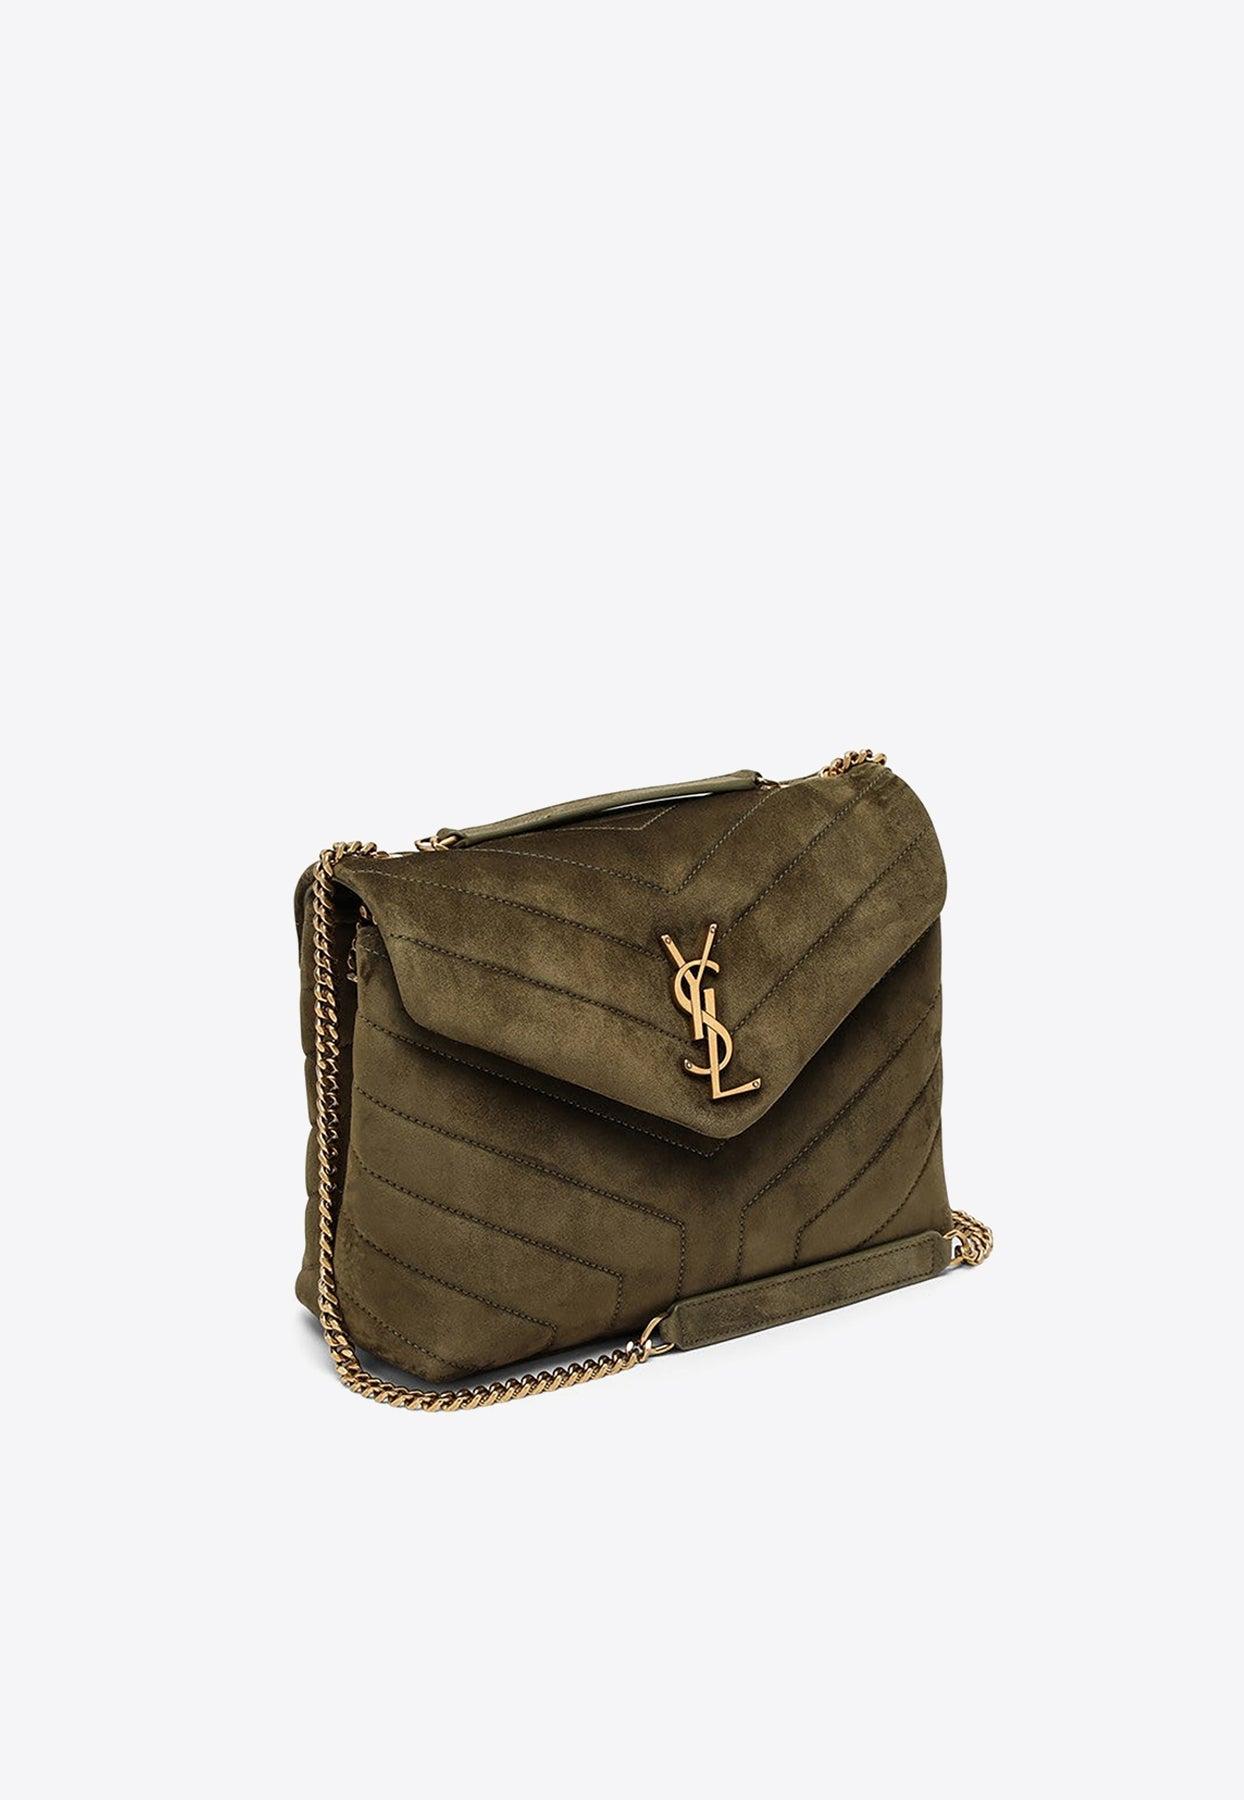 Saint Laurent Loulou Small Quilted Suede Shoulder Bag